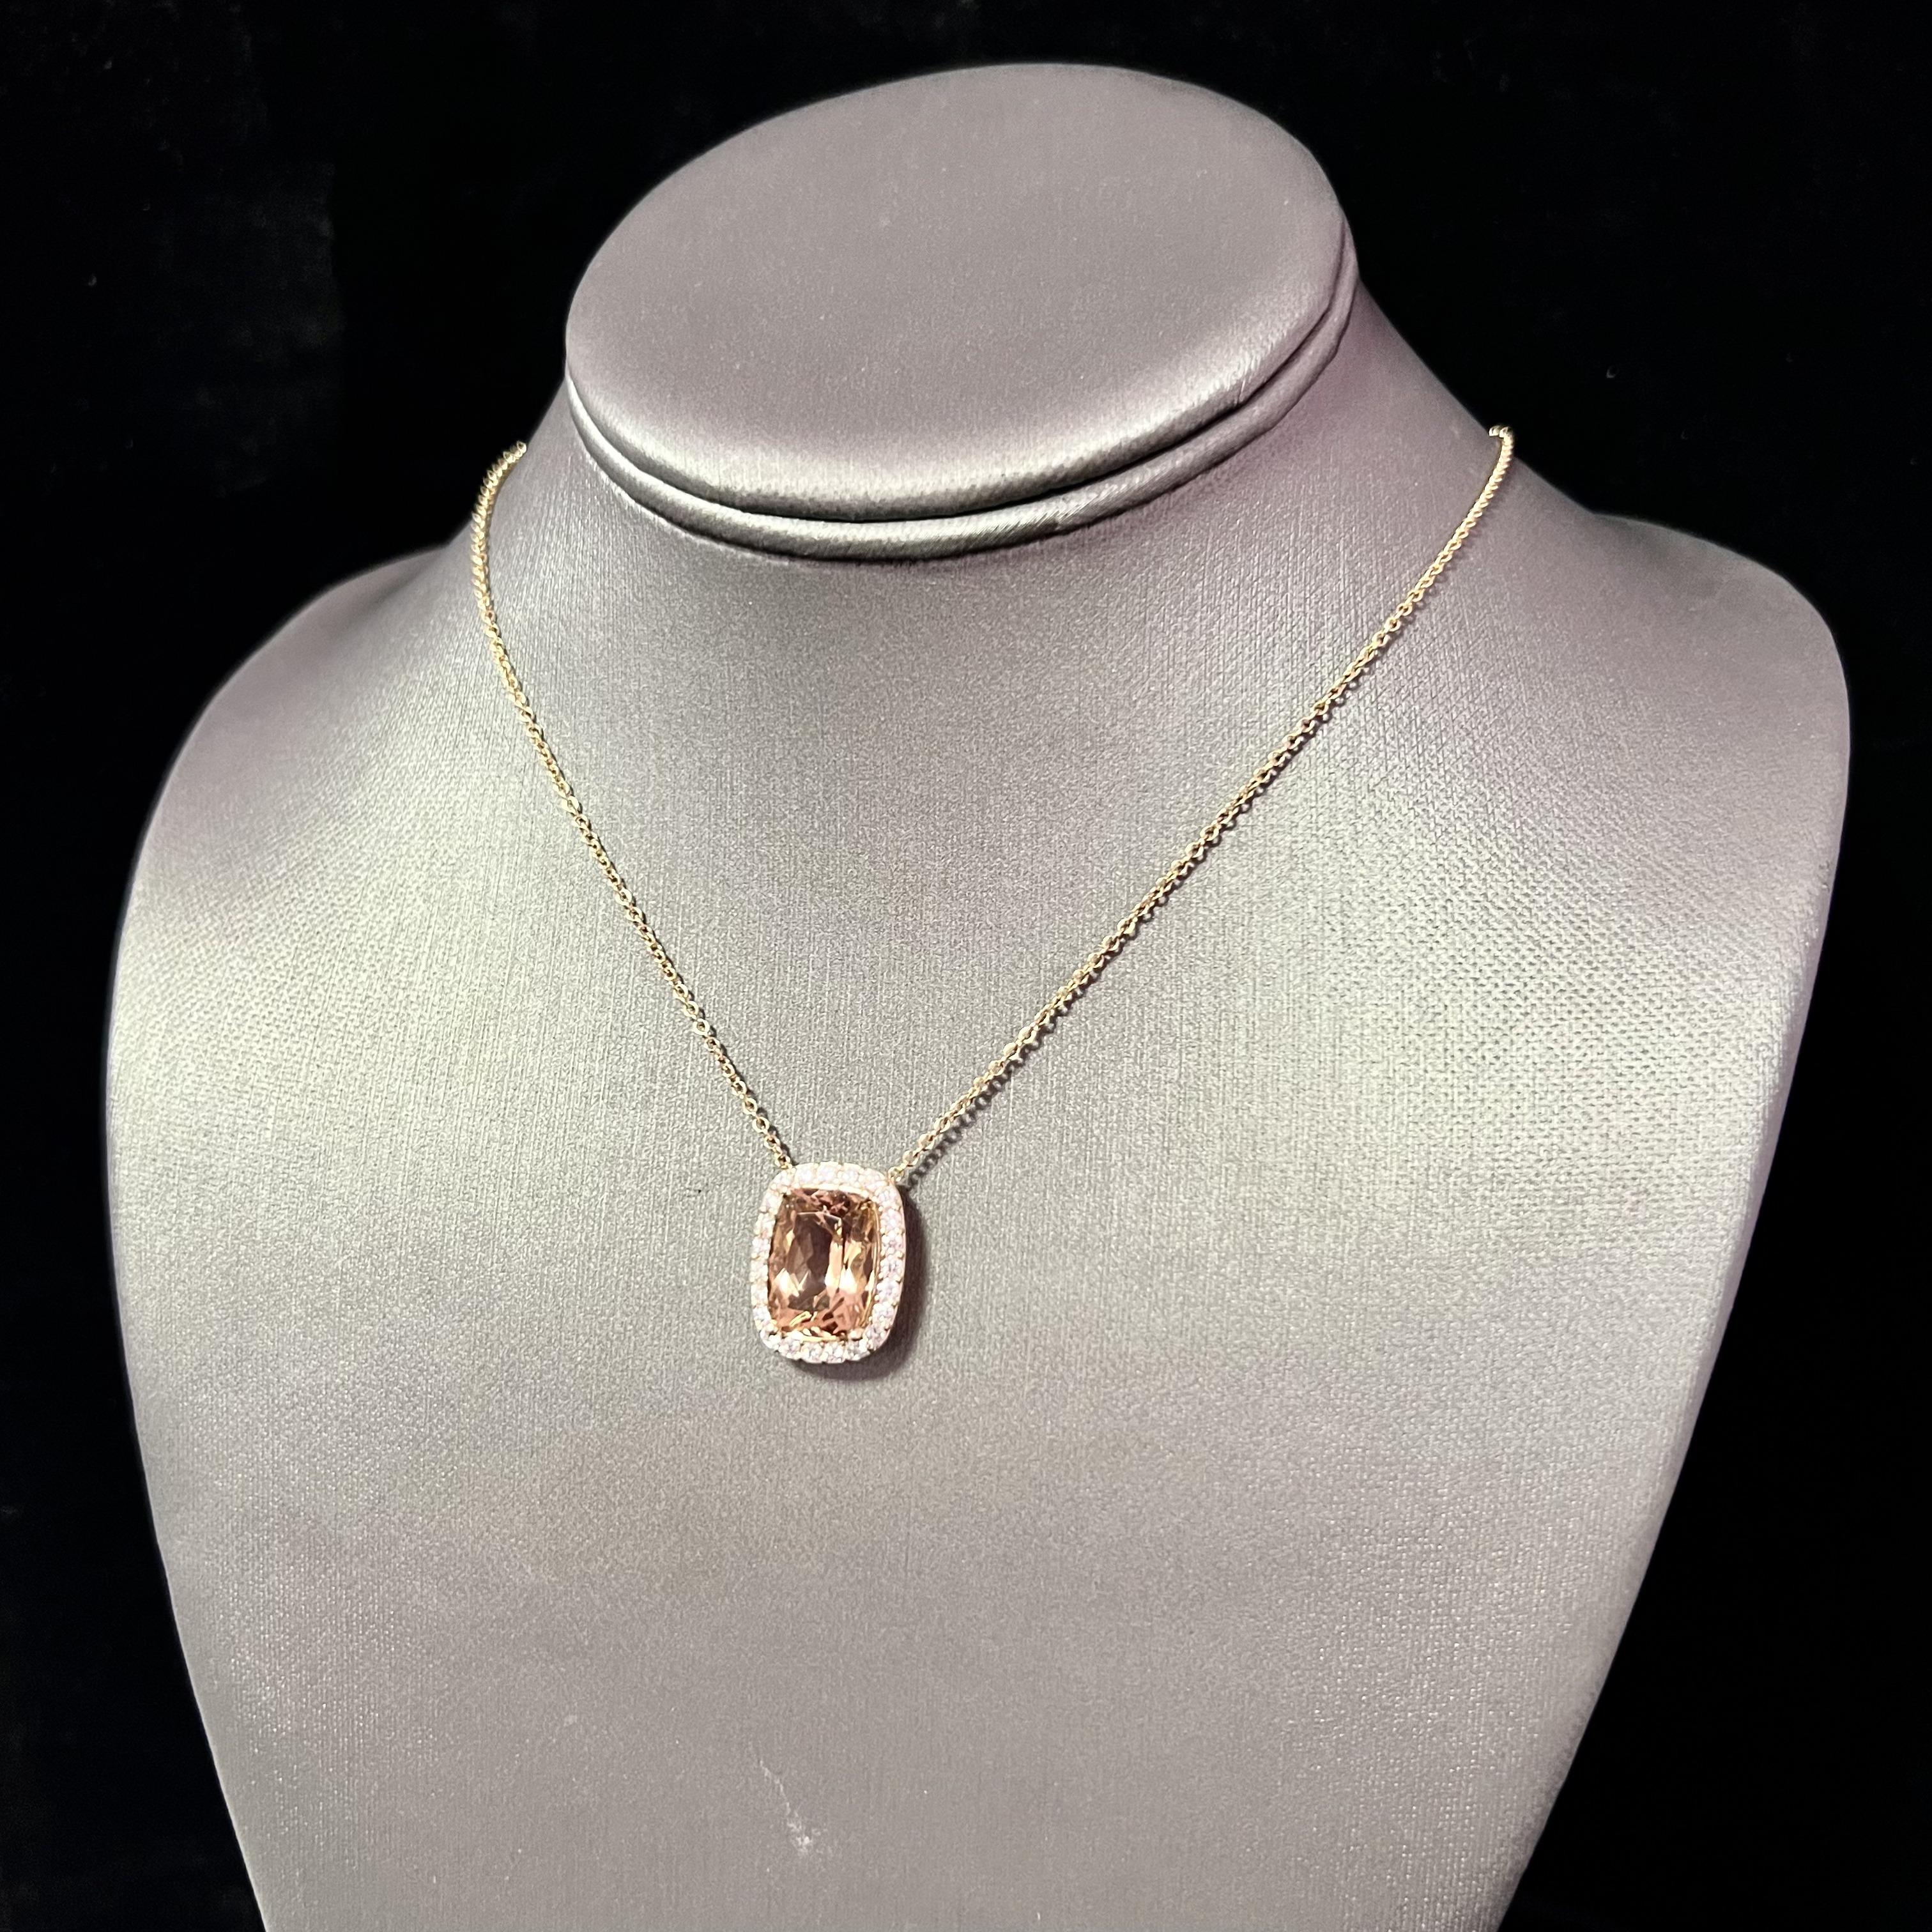 Diamond Morganite Pendant Necklace 14k Gold 7.35 TCW Certified For Sale 4